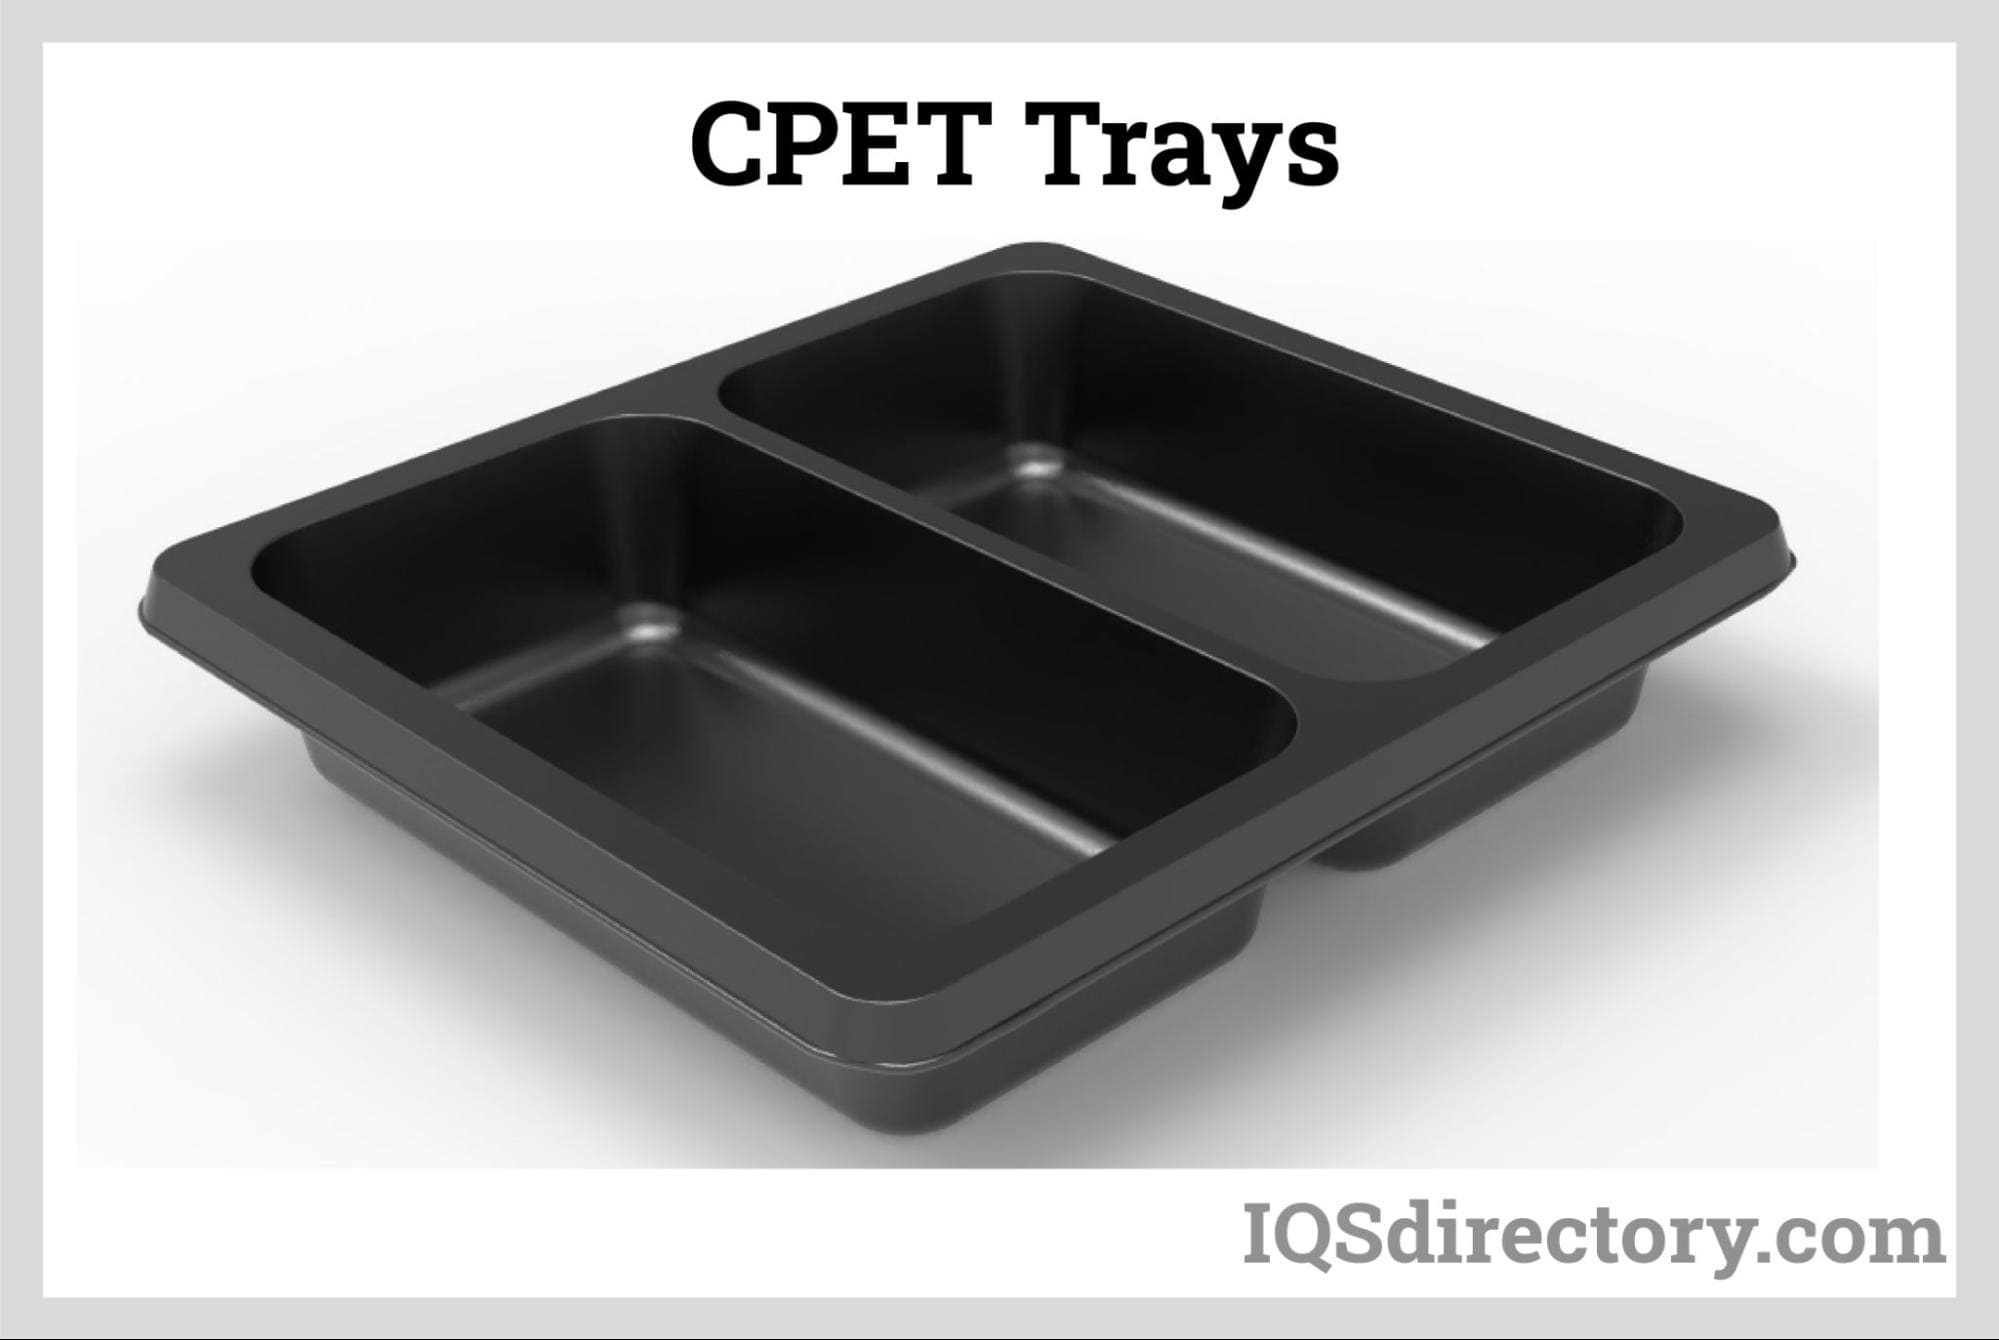 CPET Trays